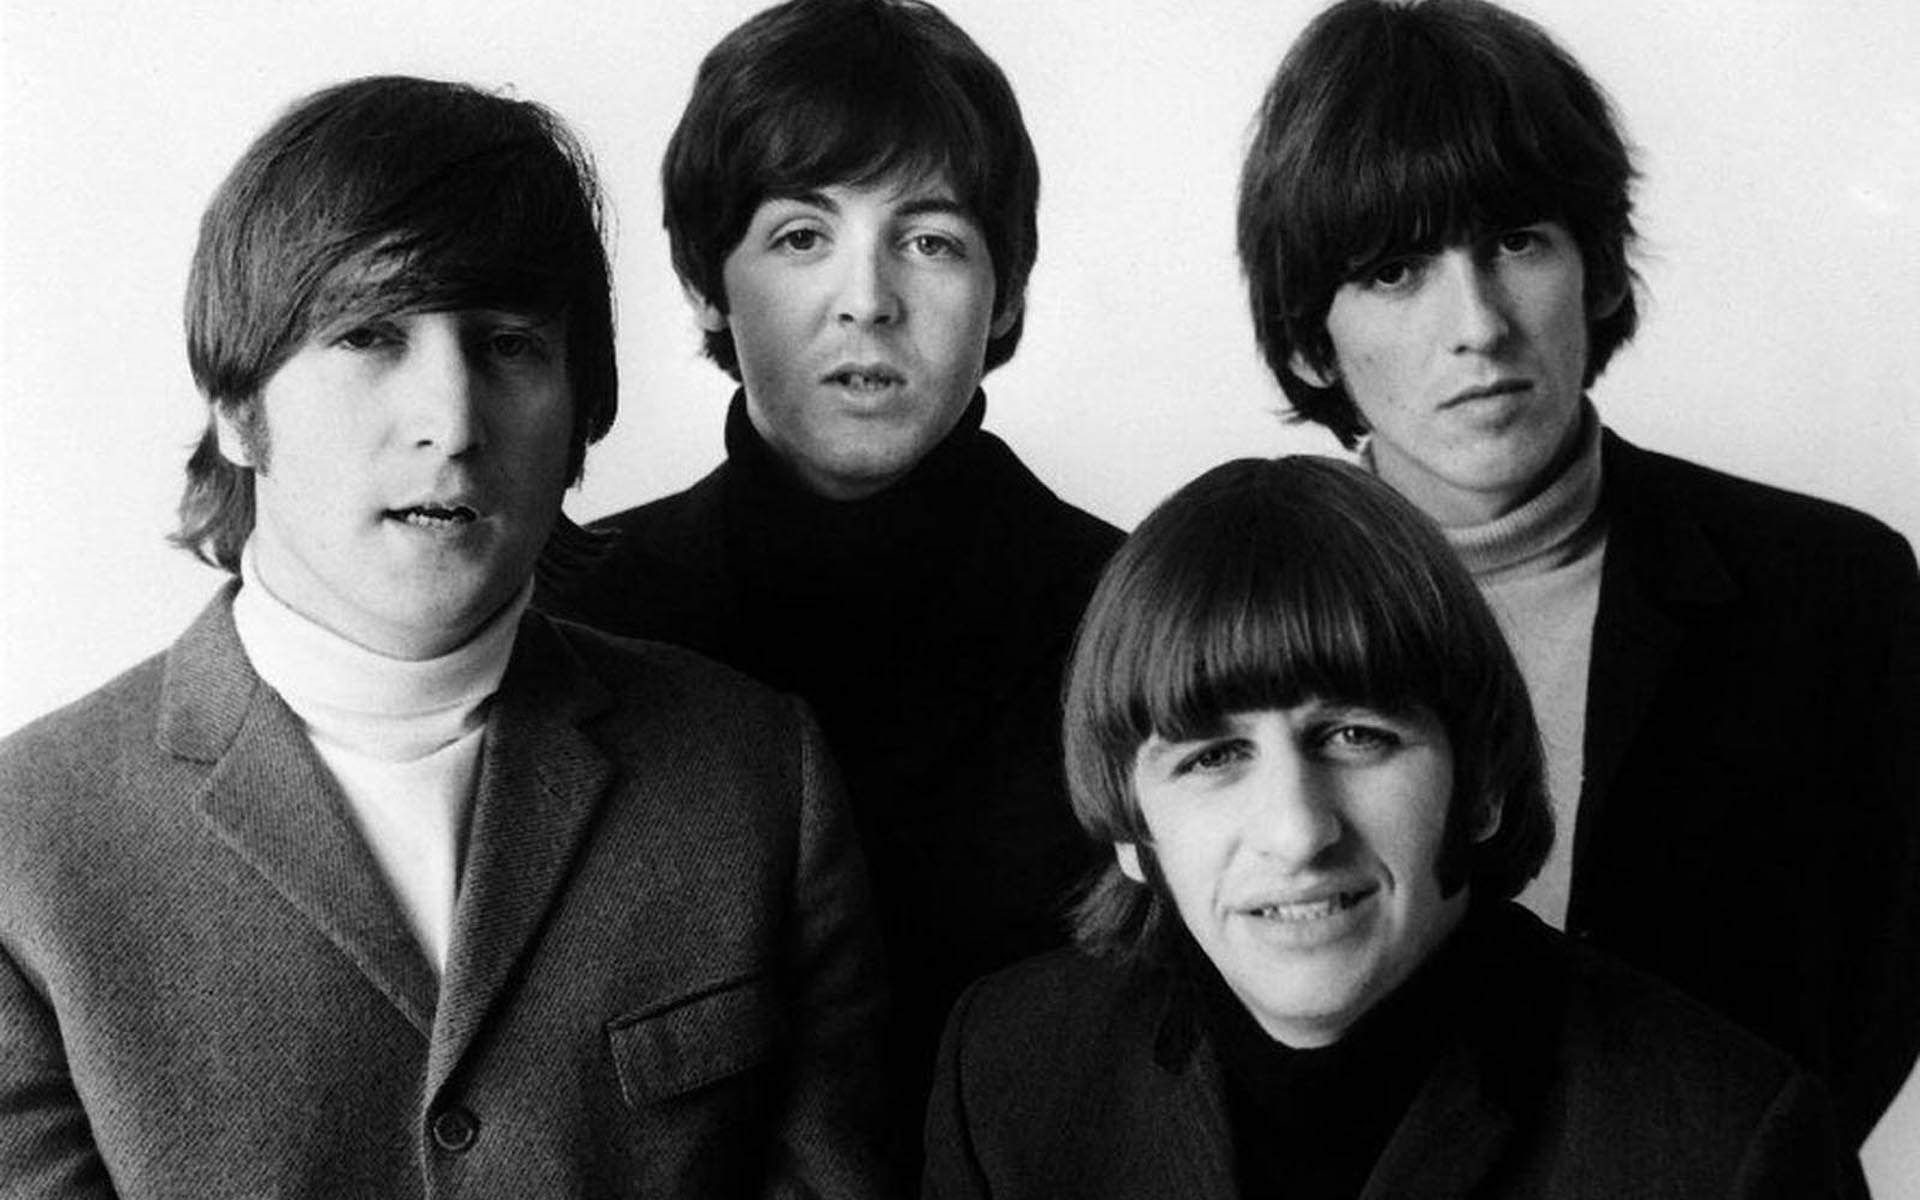 Enjoy this new The Beatles desktop background The Beatles wallpapers